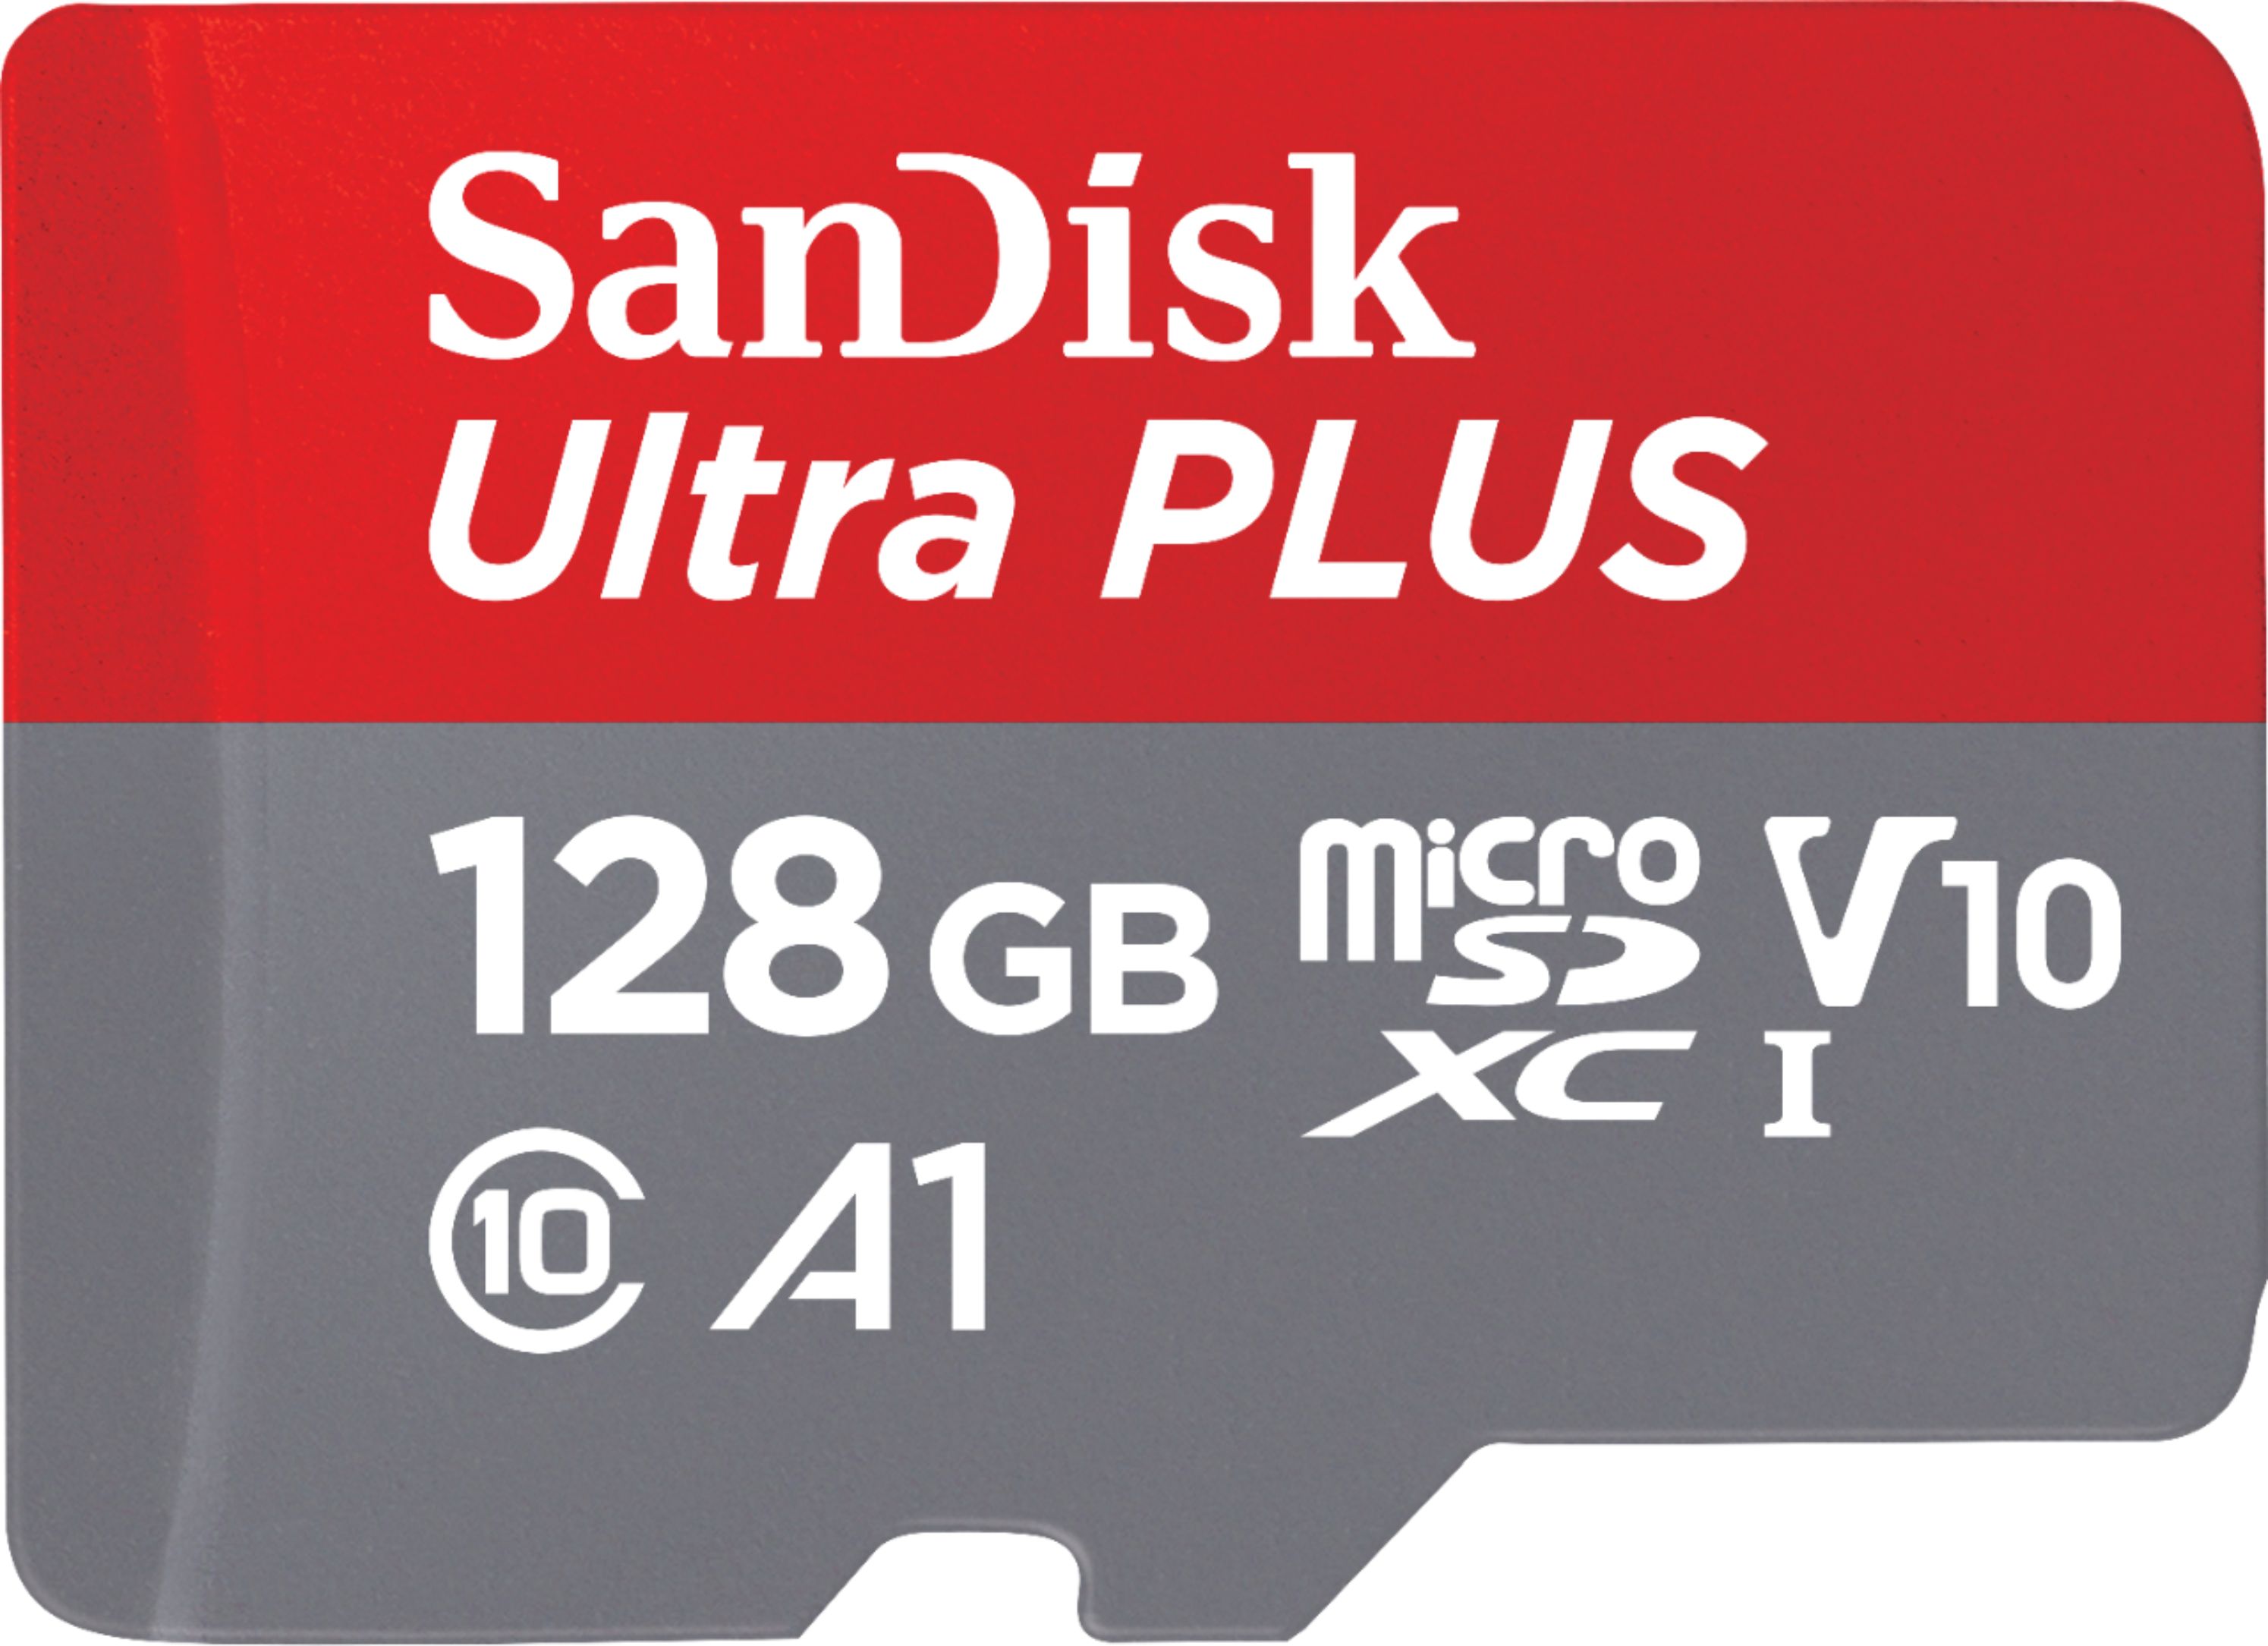 100MBs A1 U1 C10 Works with SanDisk SanDisk Ultra 128GB MicroSDXC Verified for Verykool Leo III s4006Q by SanFlash